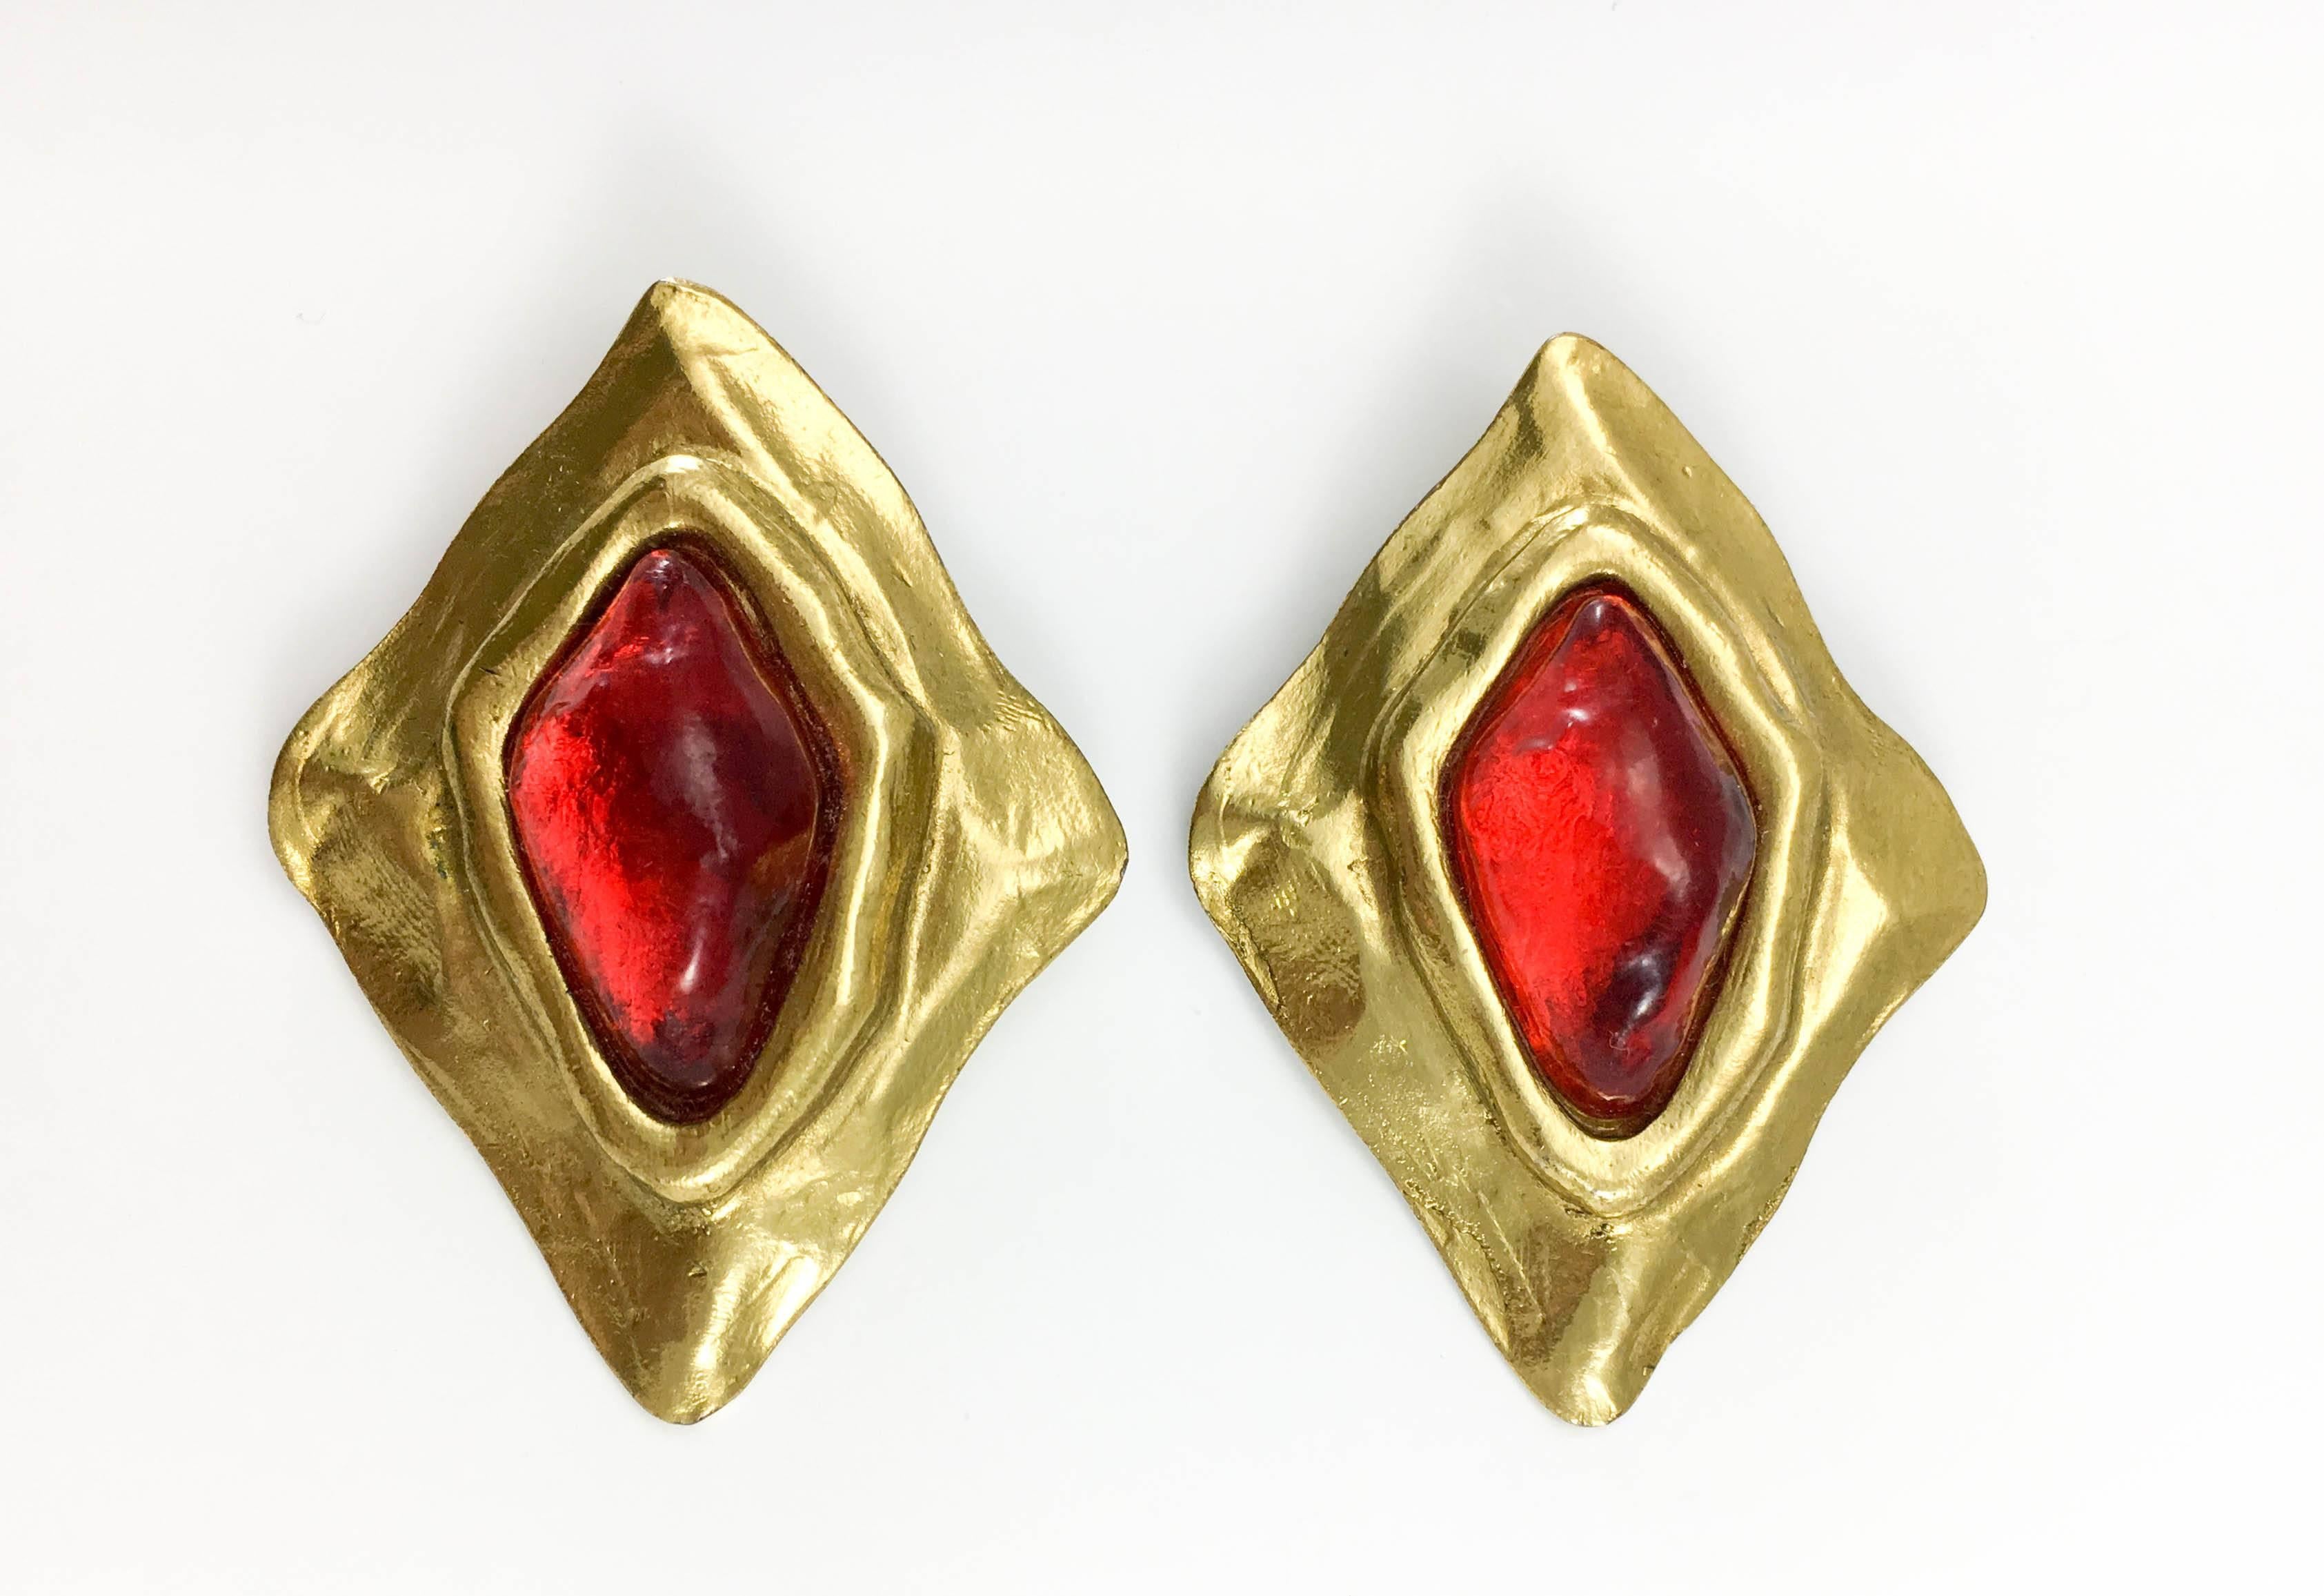 1980s Yves Saint Laurent Large Red Gripoix Gold-Plated Earrings by Goossens 1